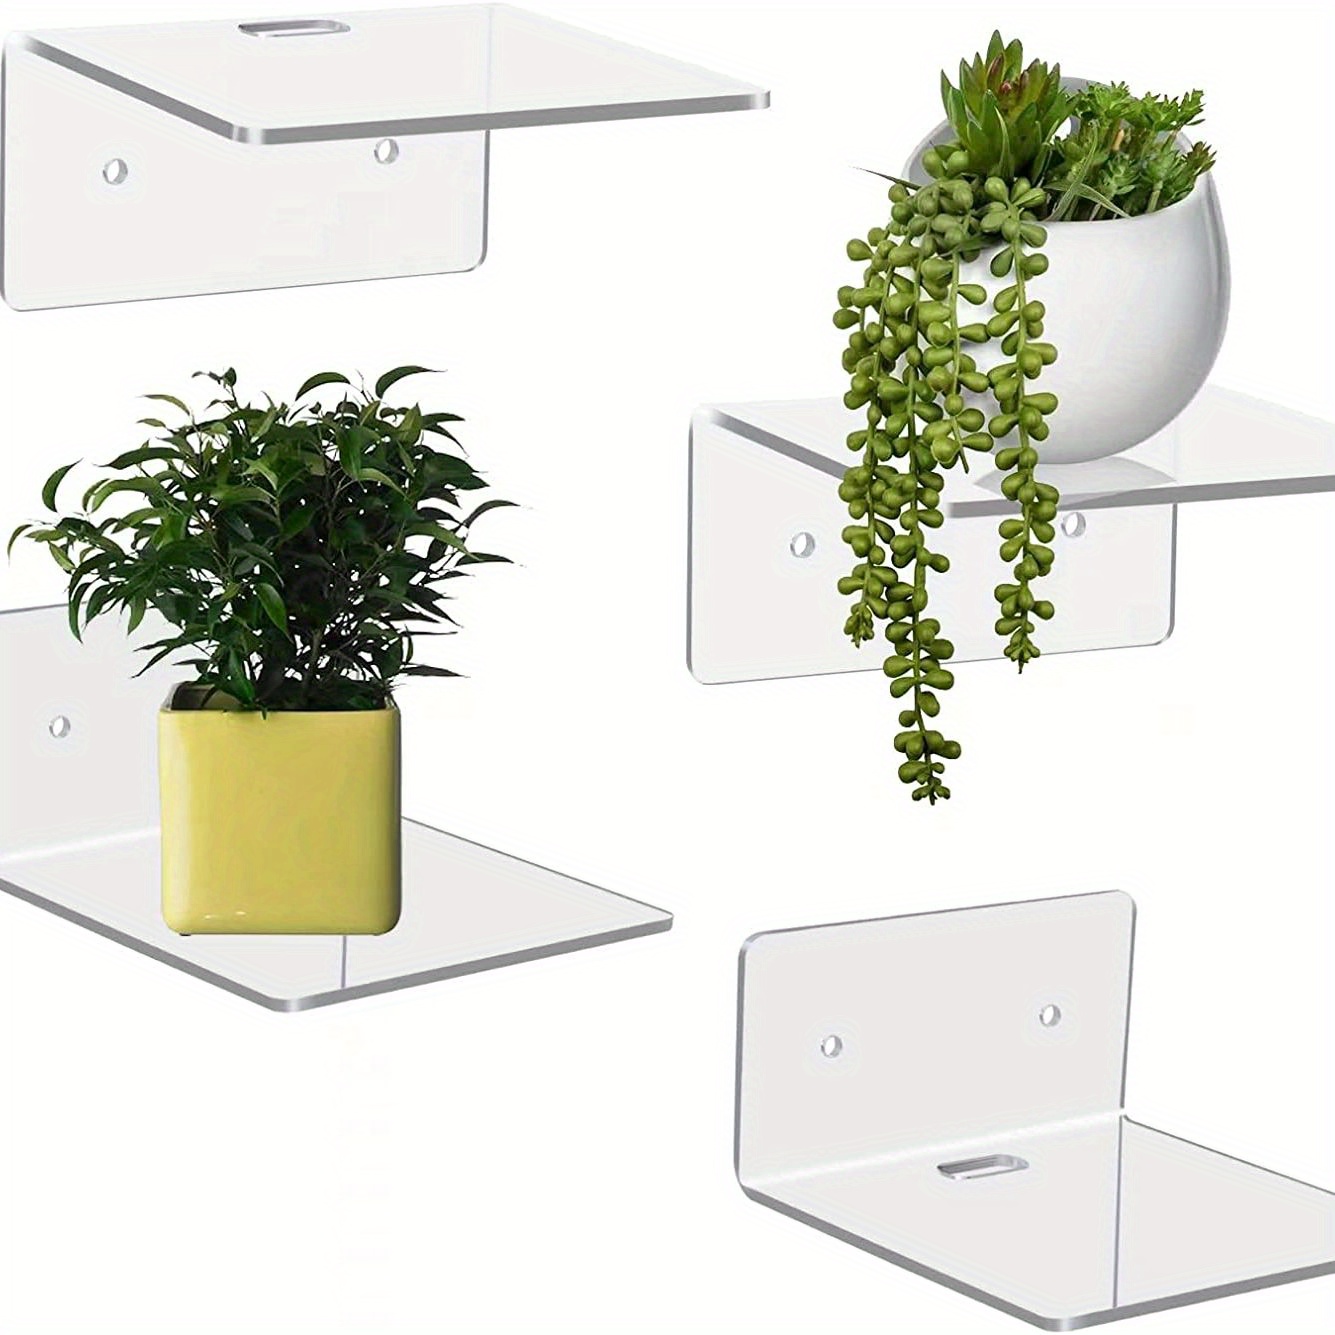 Zhehao 8 Pcs Acrylic Floating Shelves Display Adhesive Wall Shelf Cute  Hanging Plant Wall Shelf with Stickers and Cable Clips for Office Bedroom